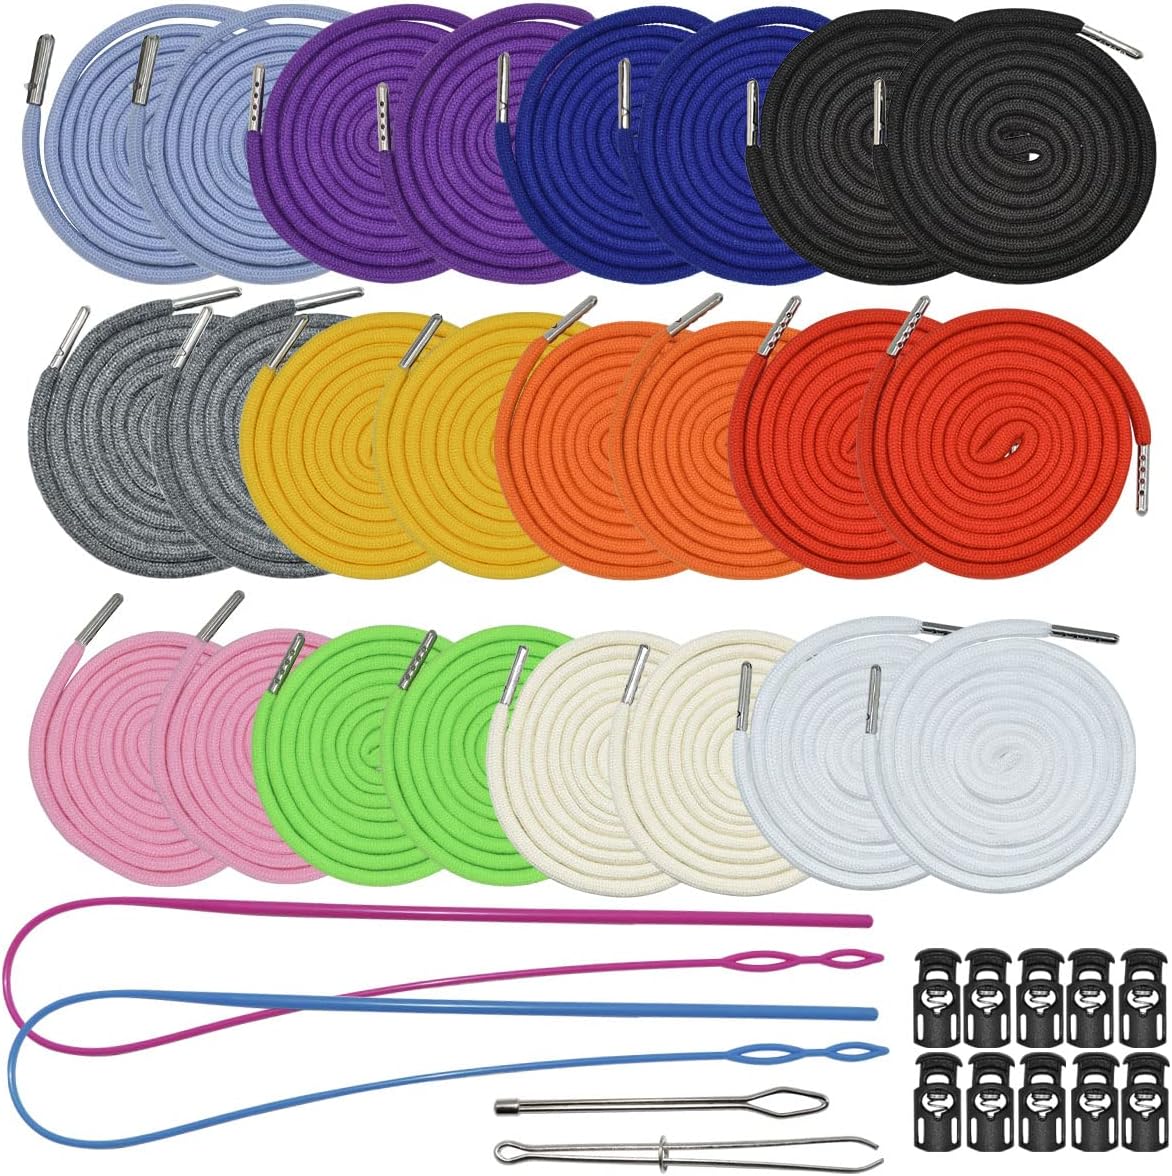 10 Pieces Drawstring Cords with Easy Threaders, Hoodie String Replacement  with Pink Flexible Drawstring Threaders for Pants Sweatpants Hoodies  Jackets